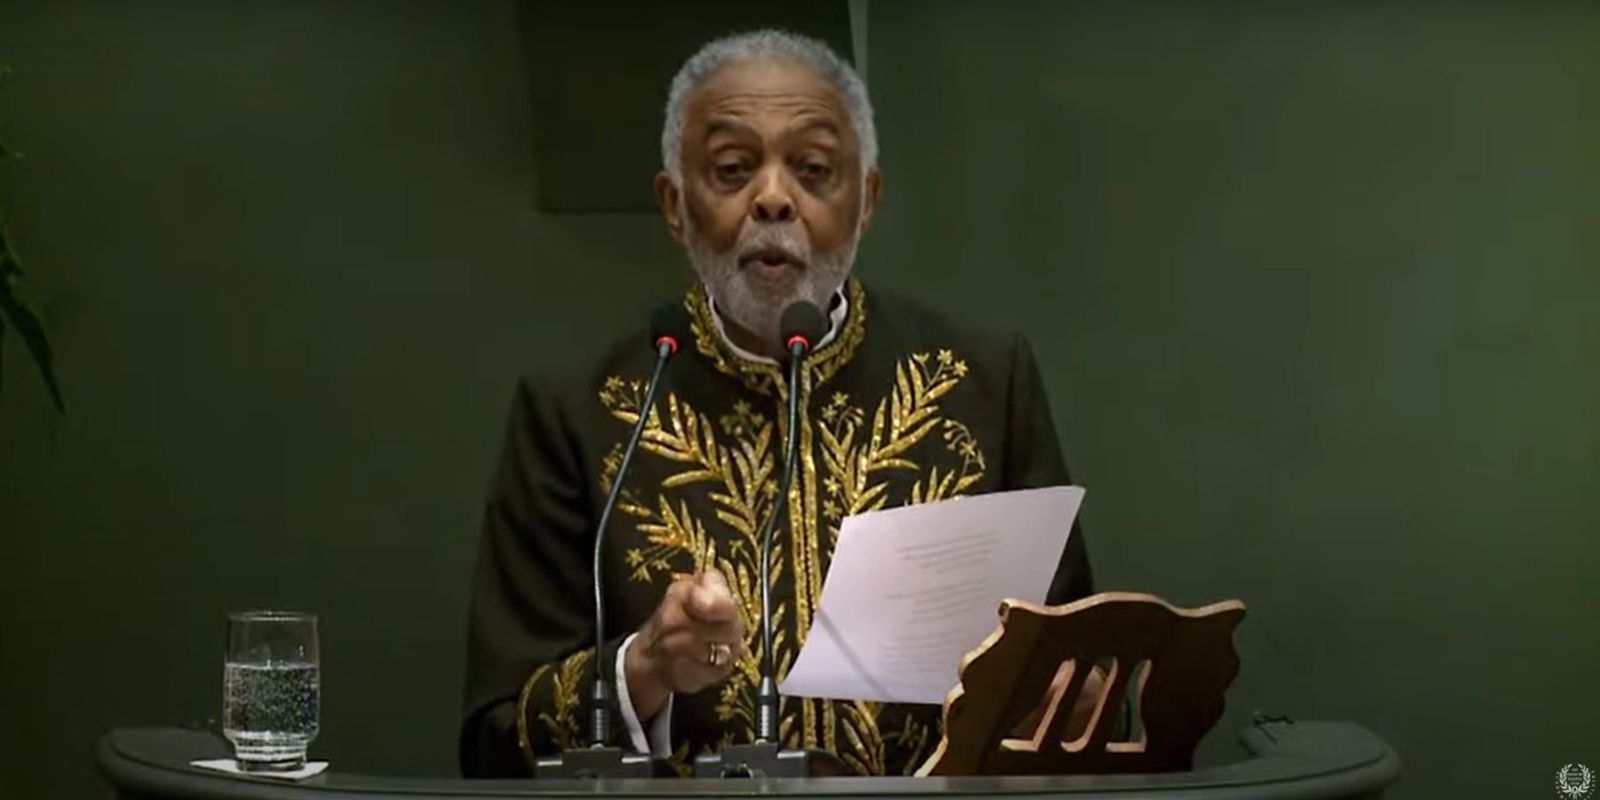 Gilberto Gil takes office at the Brazilian Academy of Letters